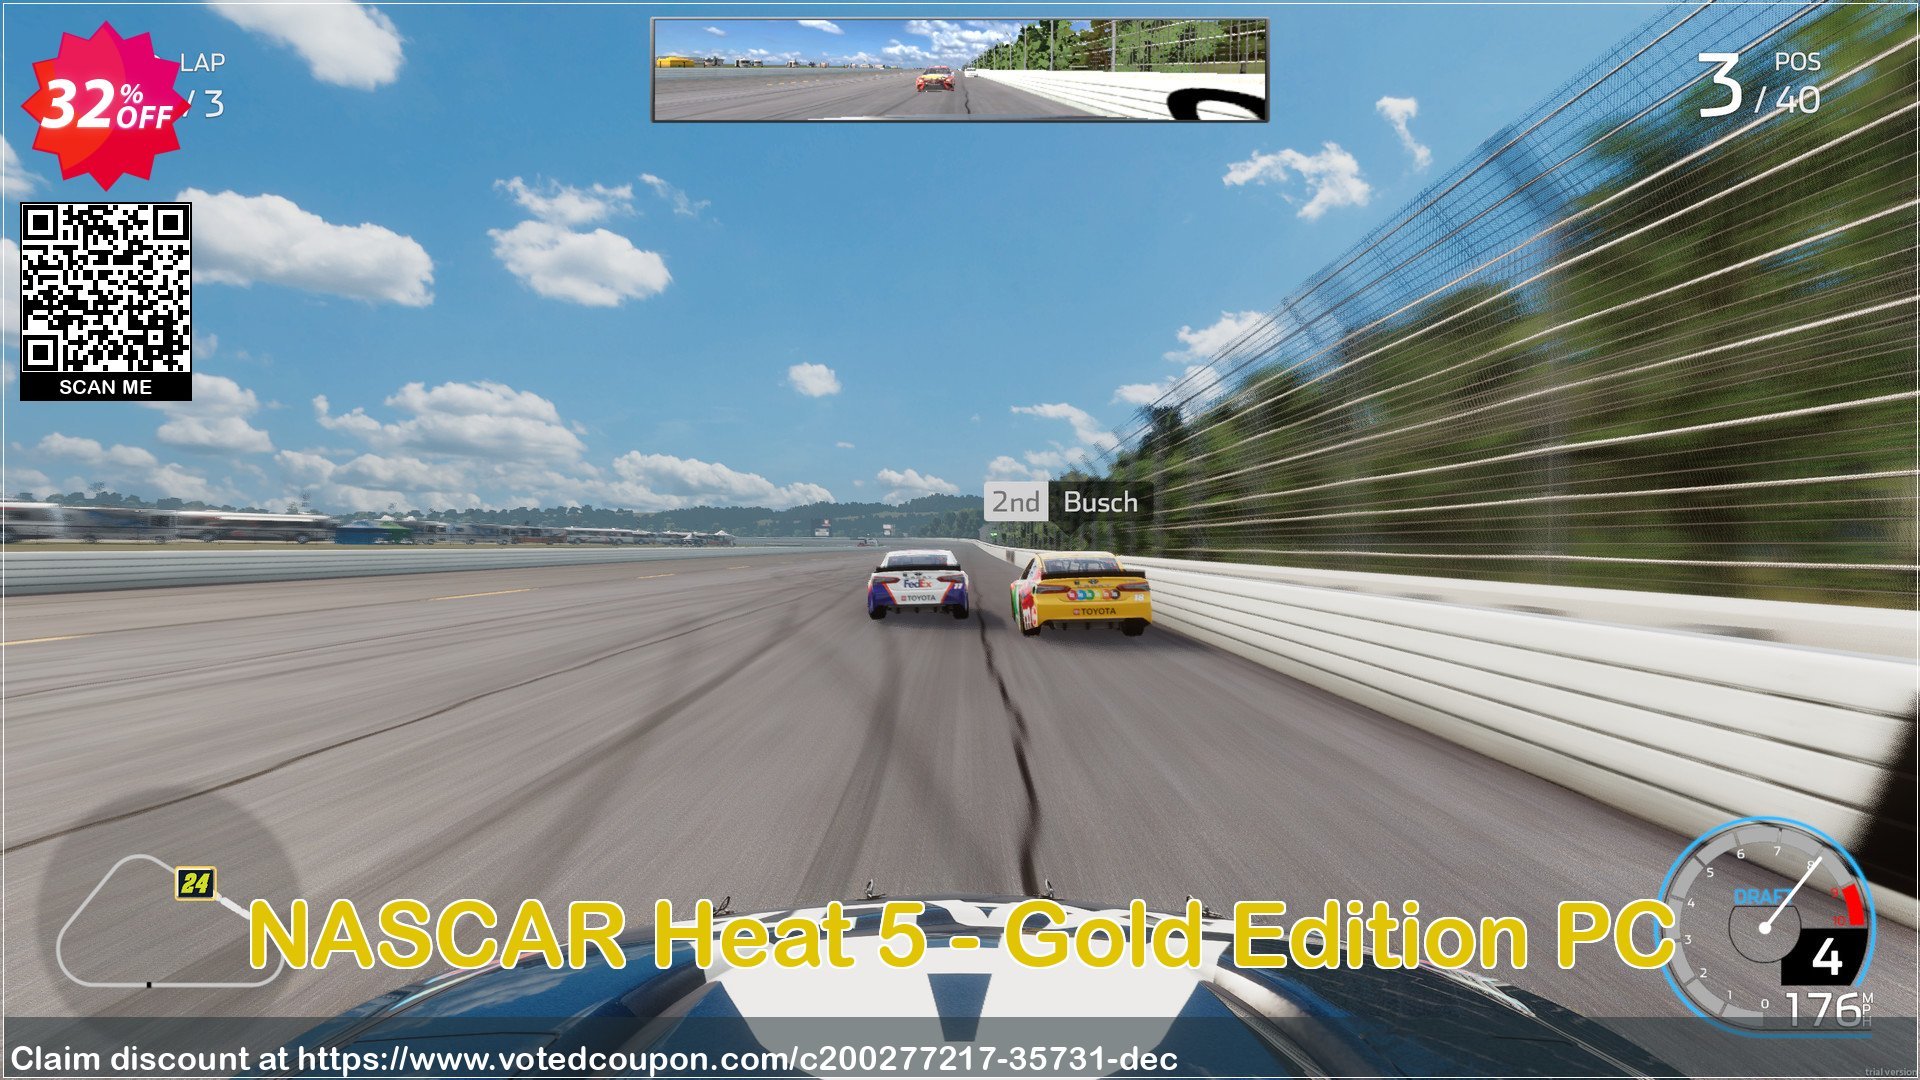 NASCAR Heat 5 - Gold Edition PC Coupon Code May 2024, 32% OFF - VotedCoupon